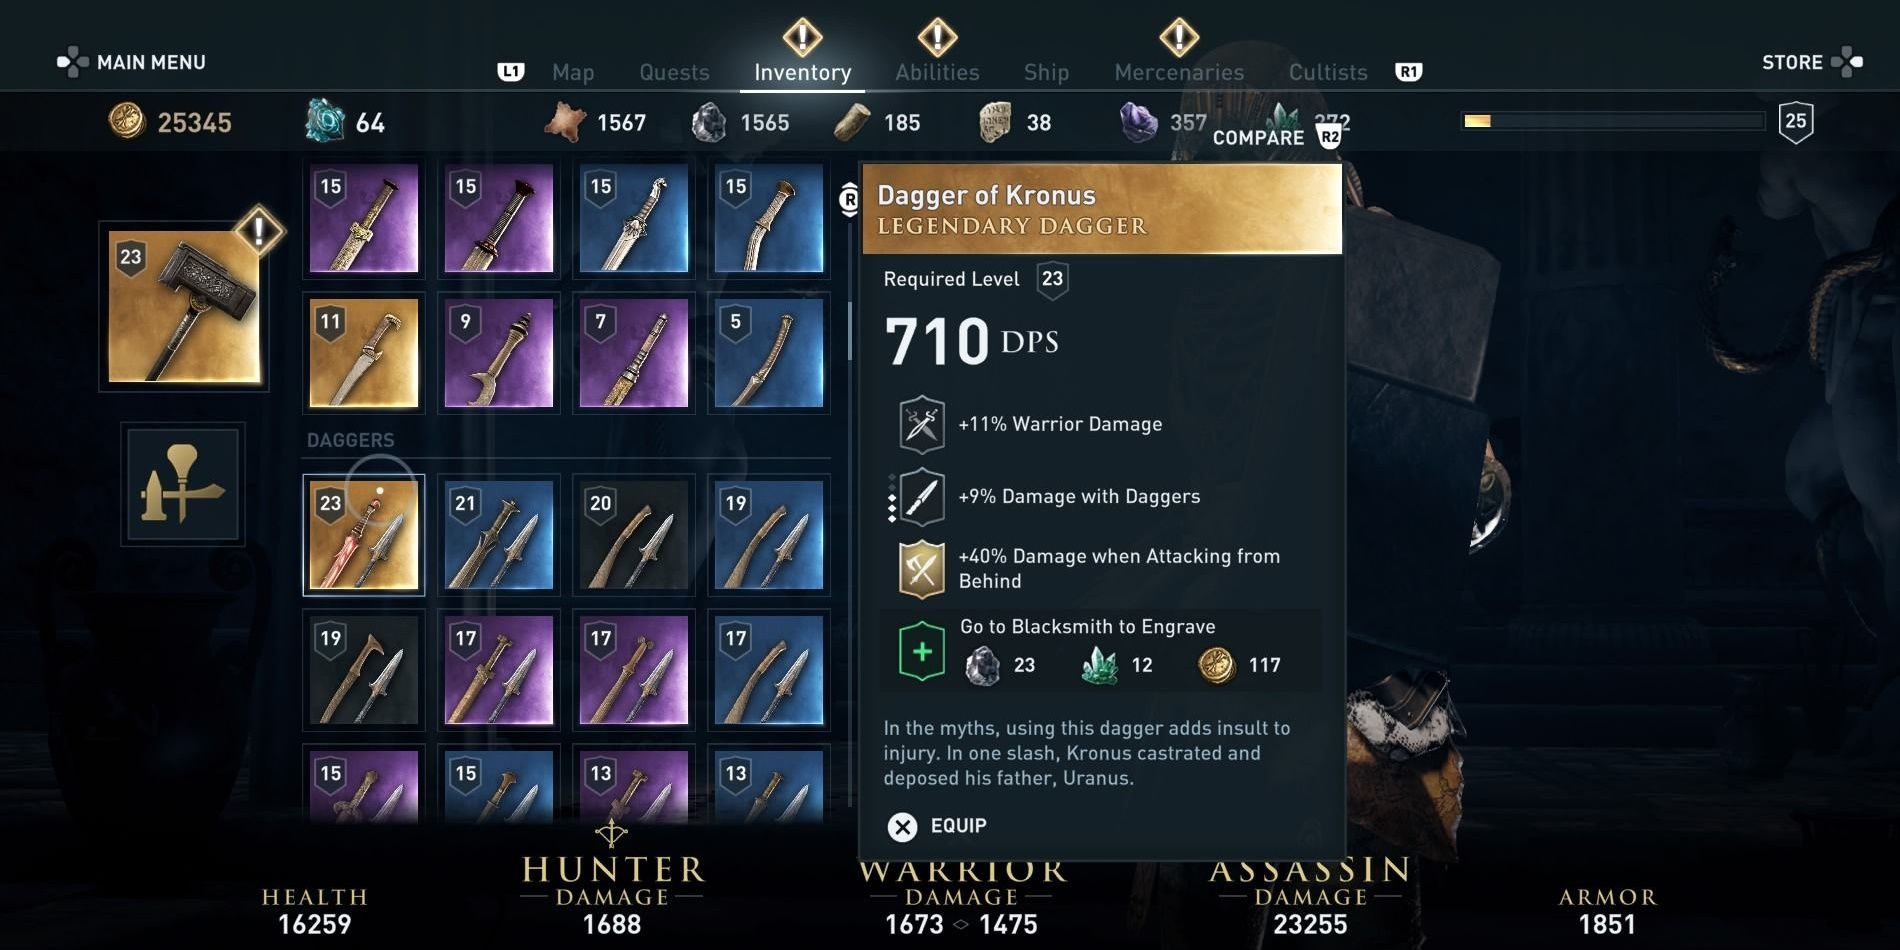 The Dagger of Kronus with the +40% Damage When Attacking From Behind Legendary Engraving in Assassin's Creed Odyssey